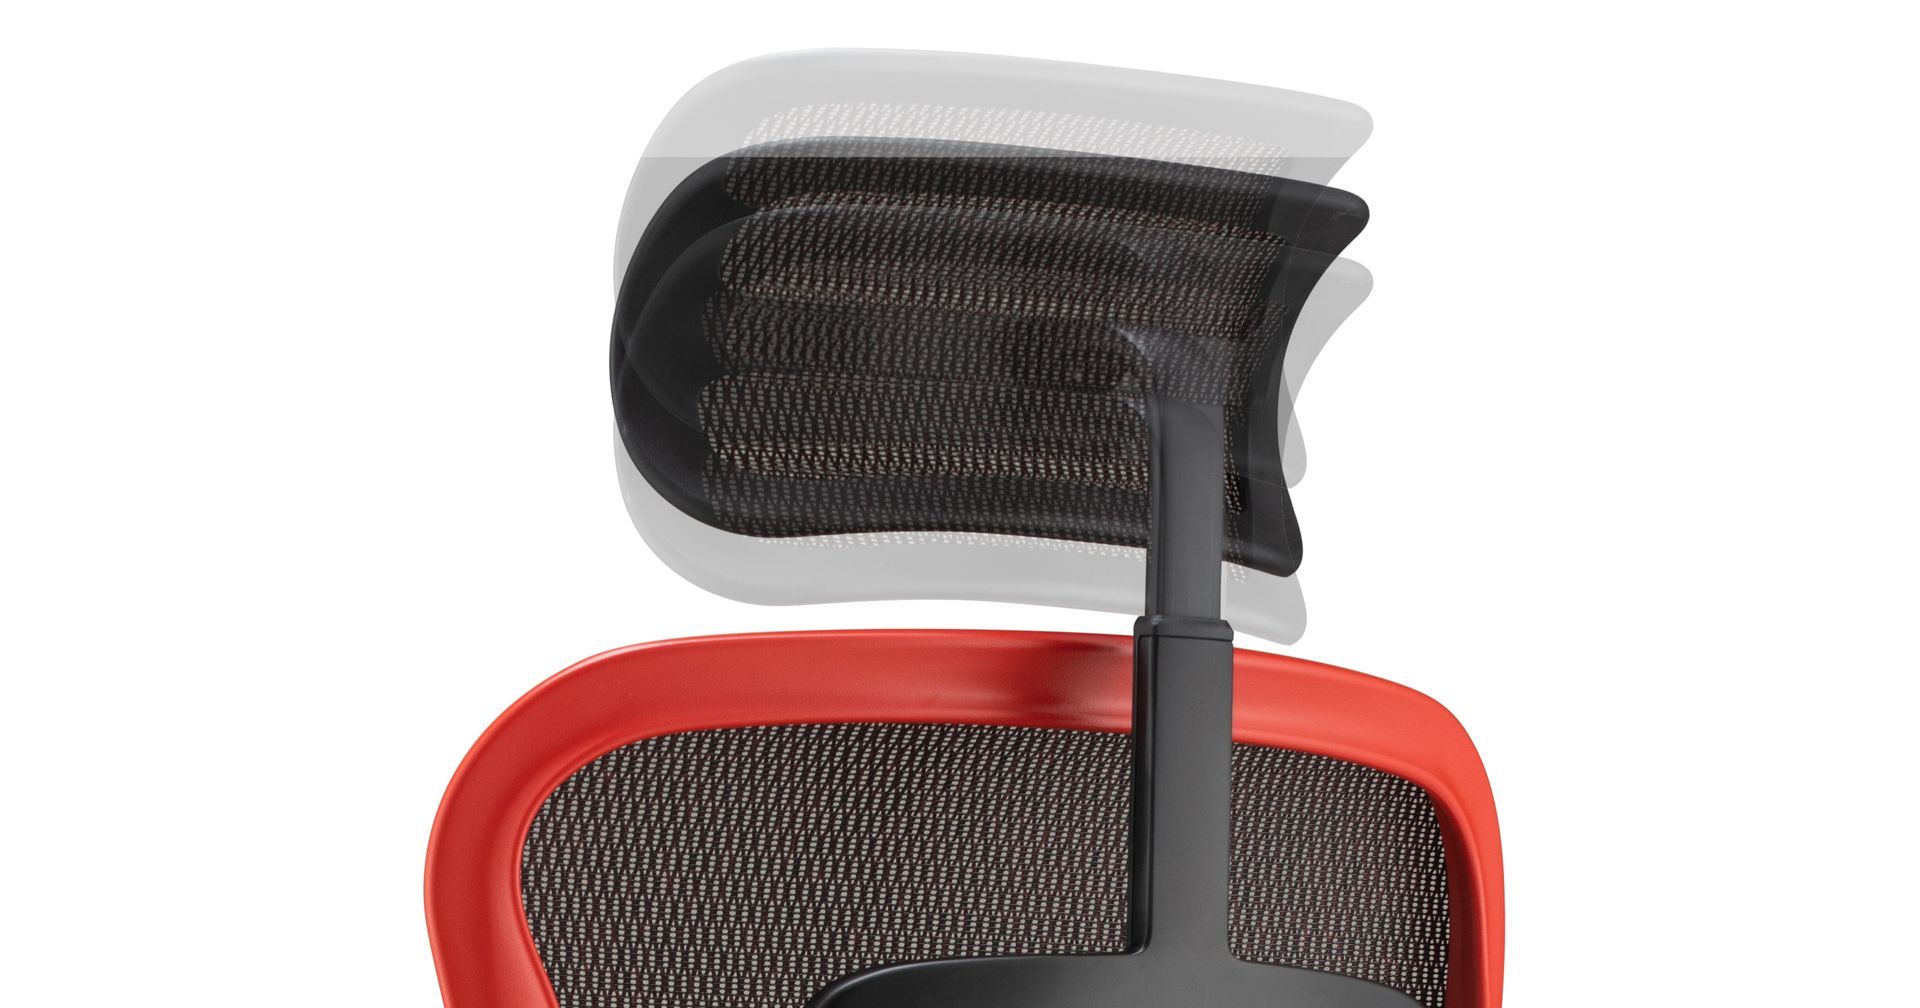 Back-side view of the Ergohuman Ultra gaming chair headrest, highlighting height adjustment